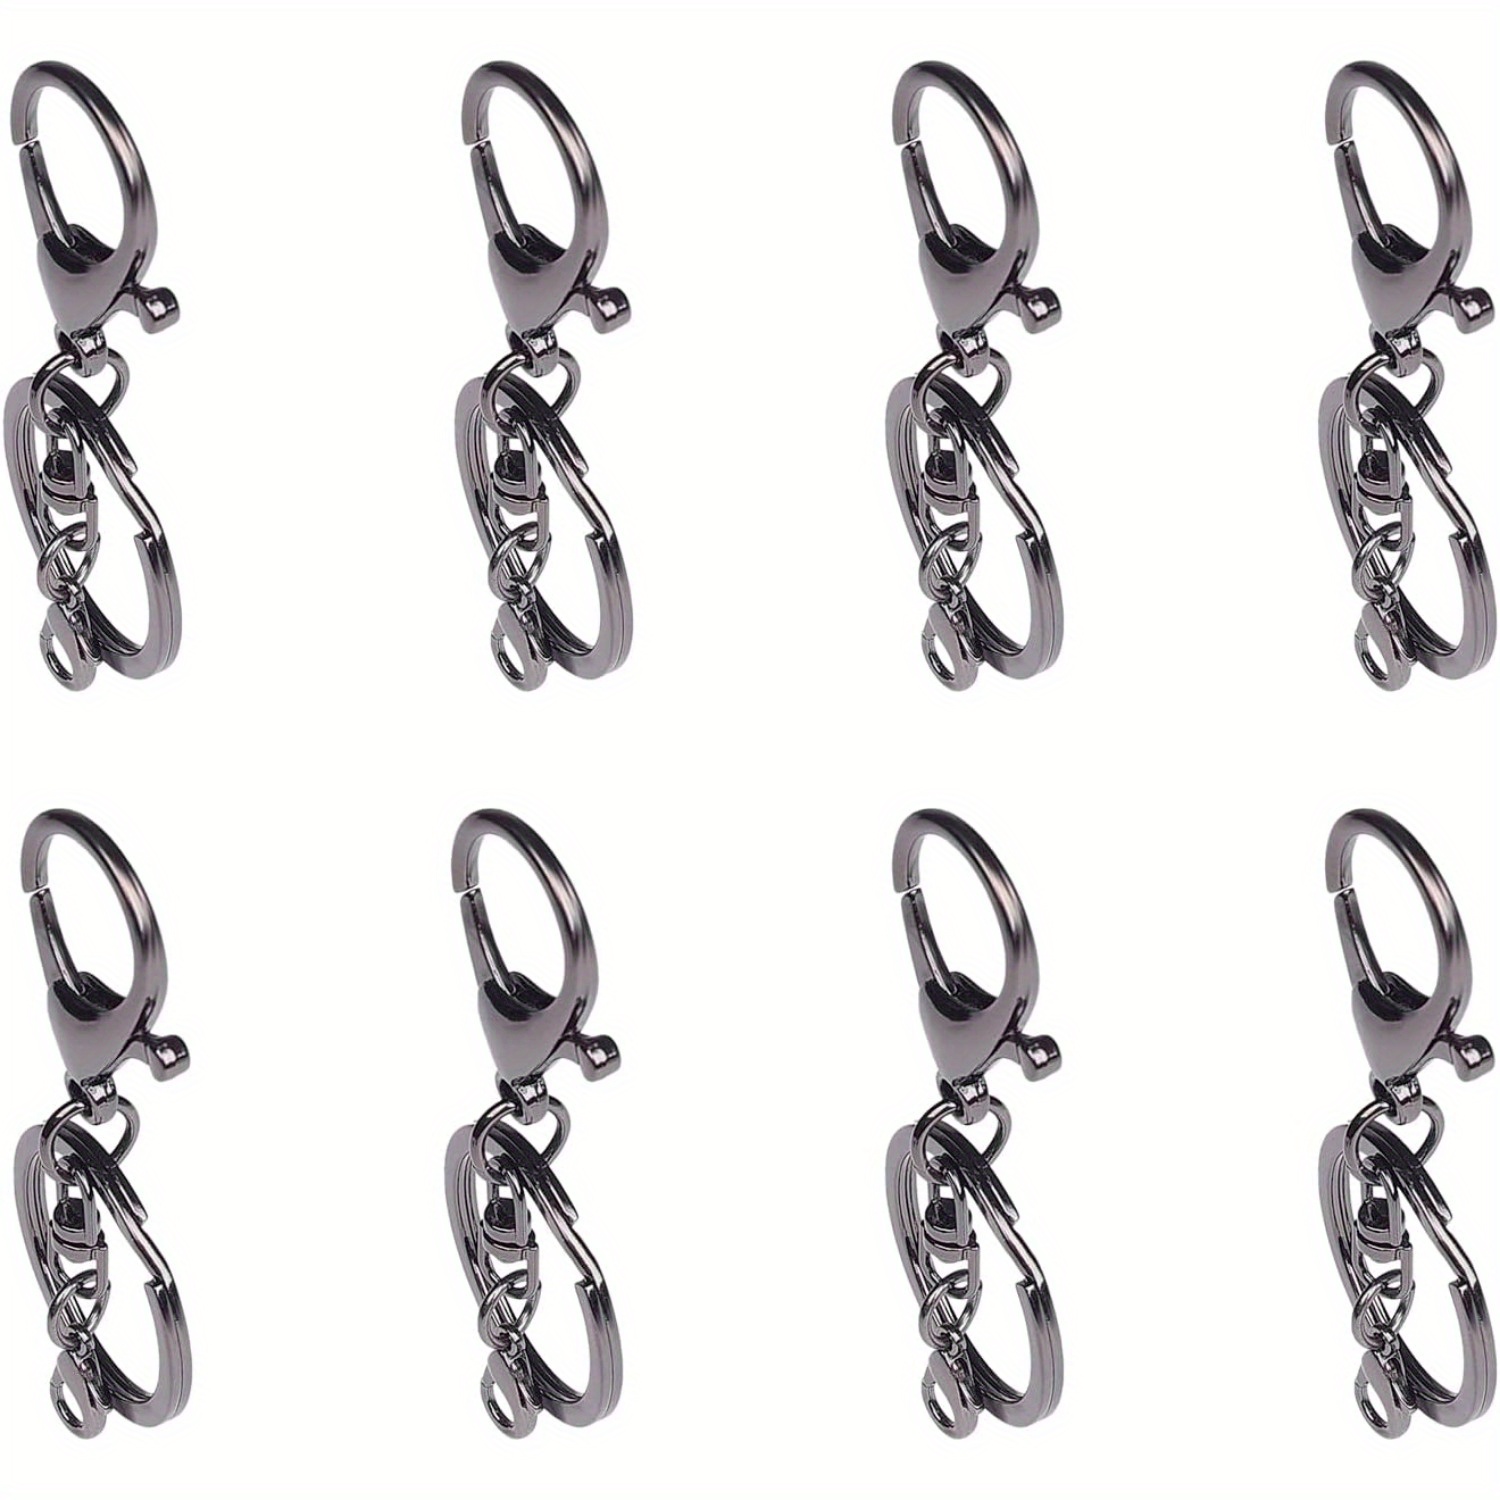 24 Pcs Metal Lobster Claw Clasps Swivel Lanyards Trigger Snap Hooks Strap for Keychain Key Rings Connector DIY Bags Art Crafts Jewelry Findings